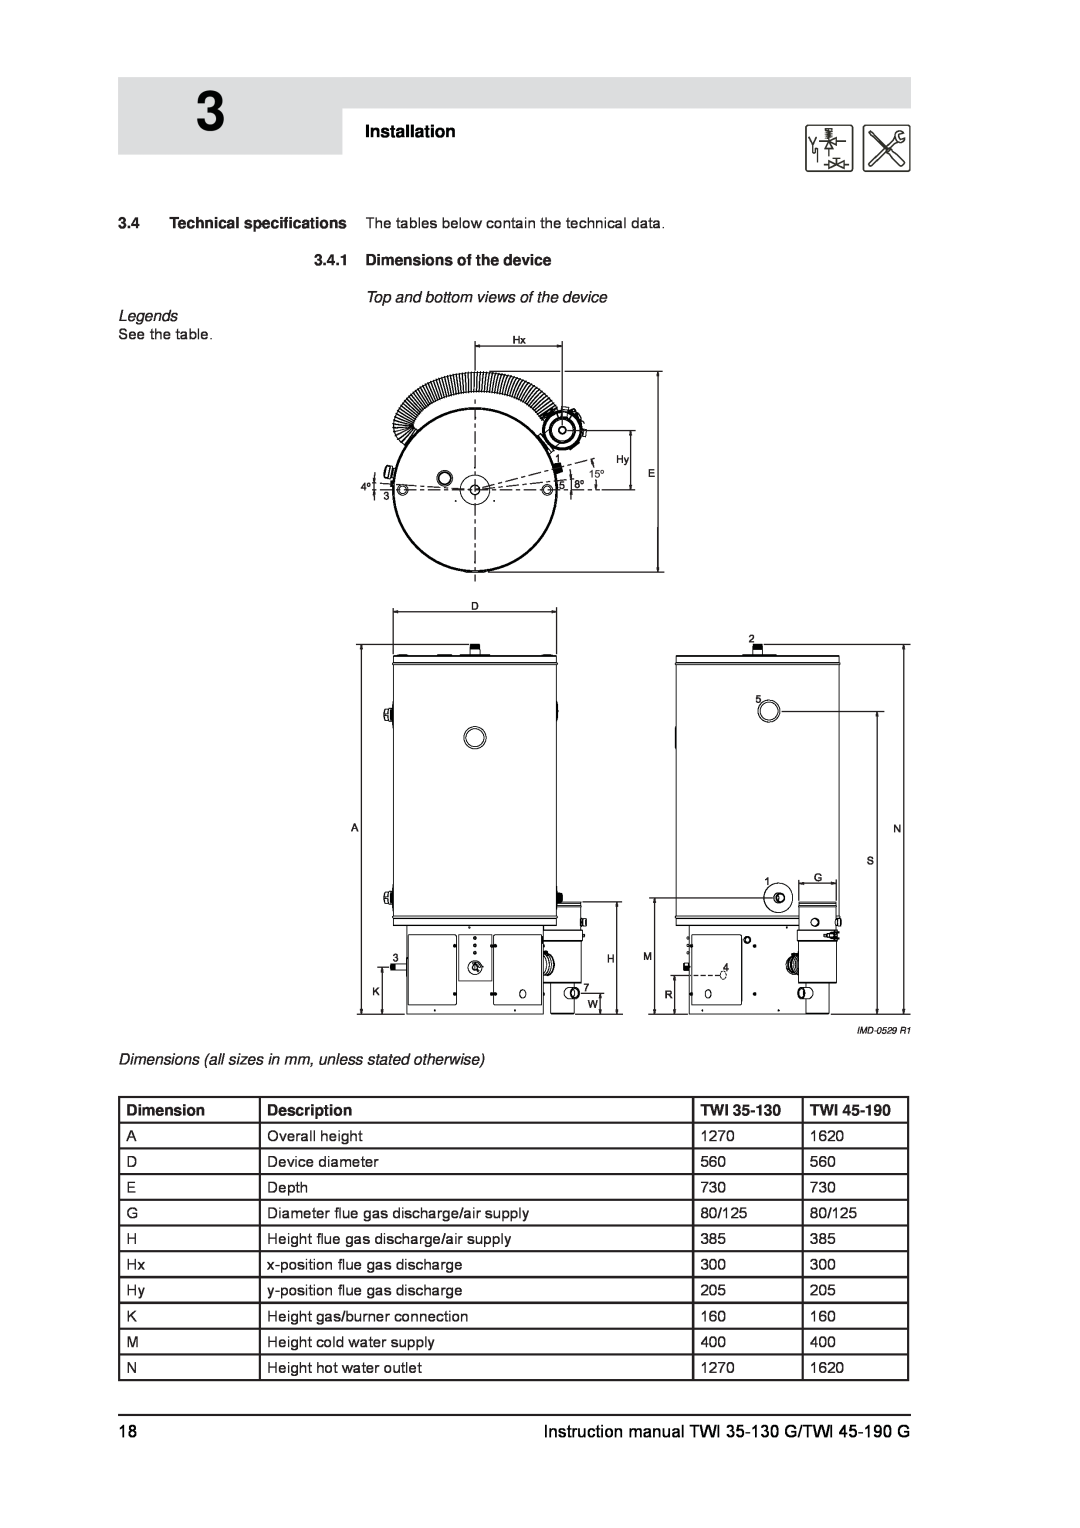 A.O. Smith Dimensions of the device, Installation, Instruction manual TWI 35-130 G/TWI 45-190 G, See the table 